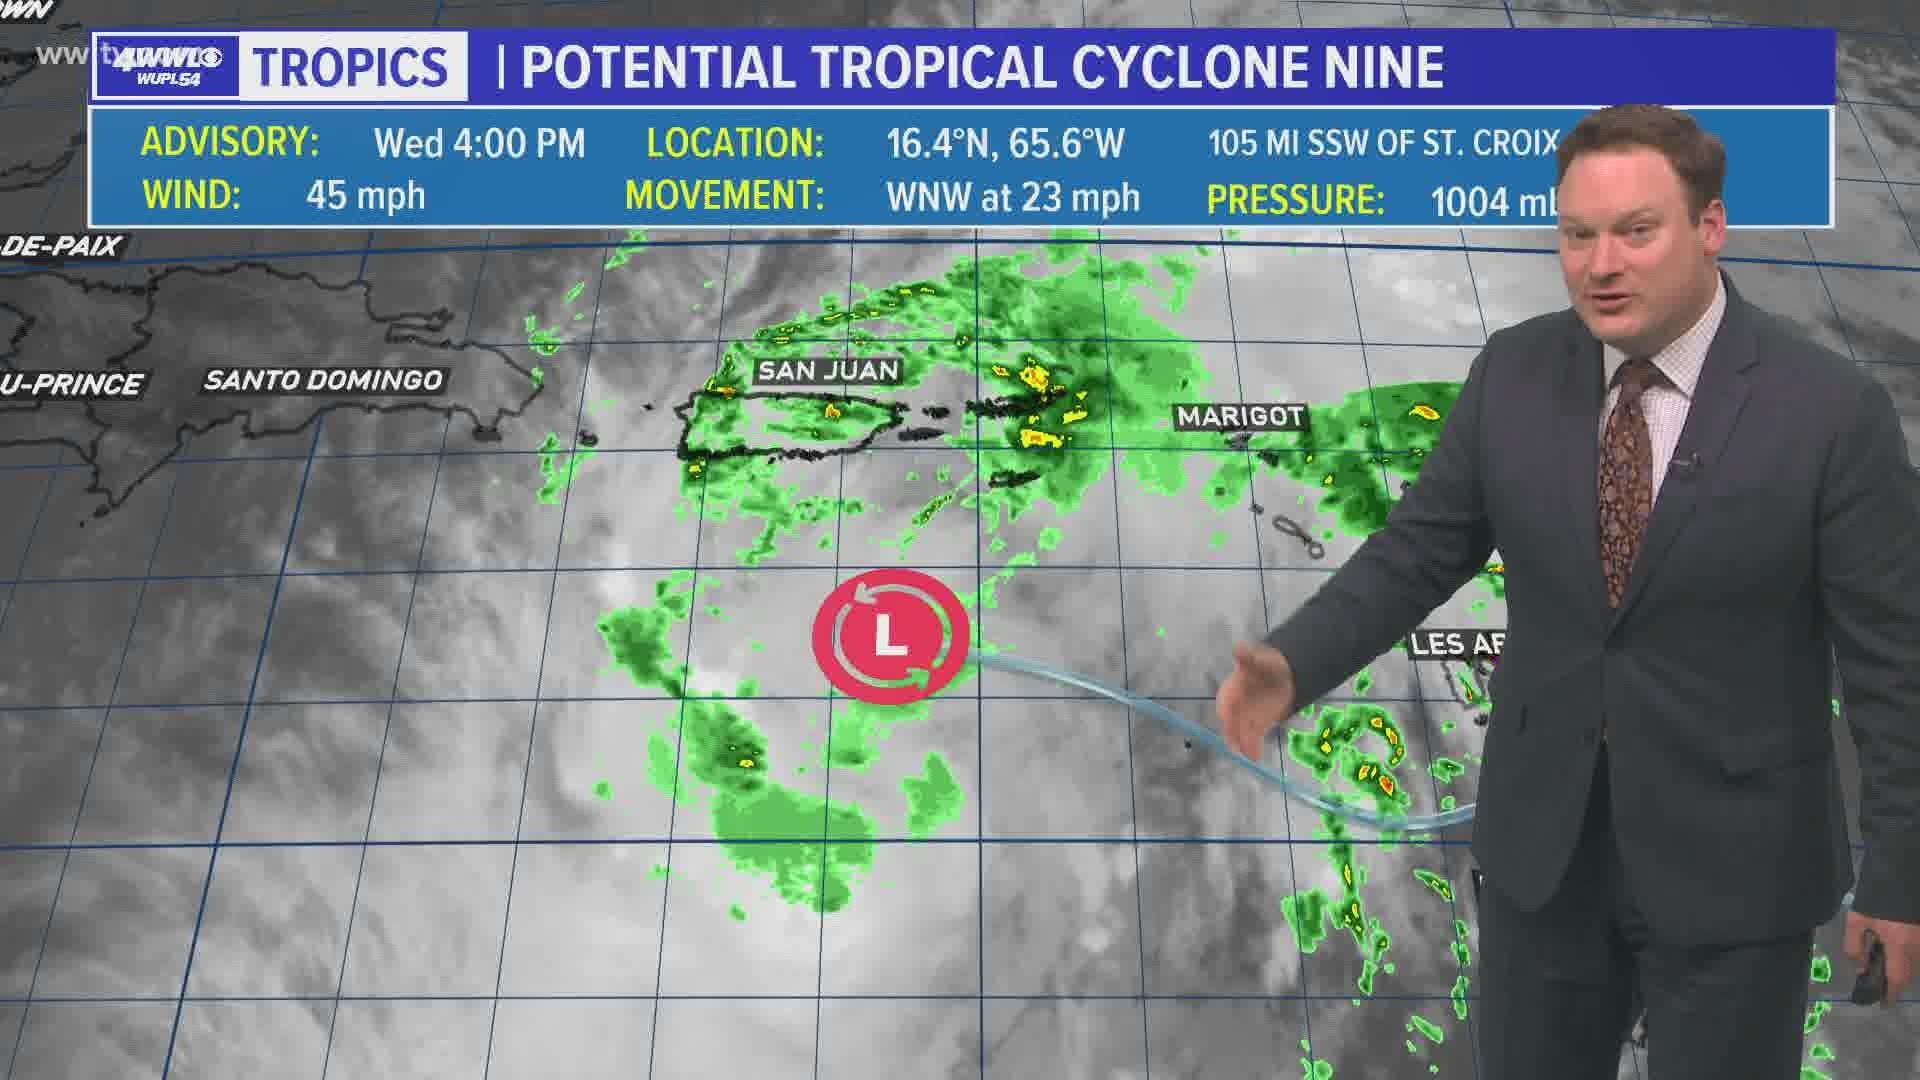 Chief Meteorologist Chris Franklin has a detailed look at Potential Tropical Cyclone 9 in the Caribbean.